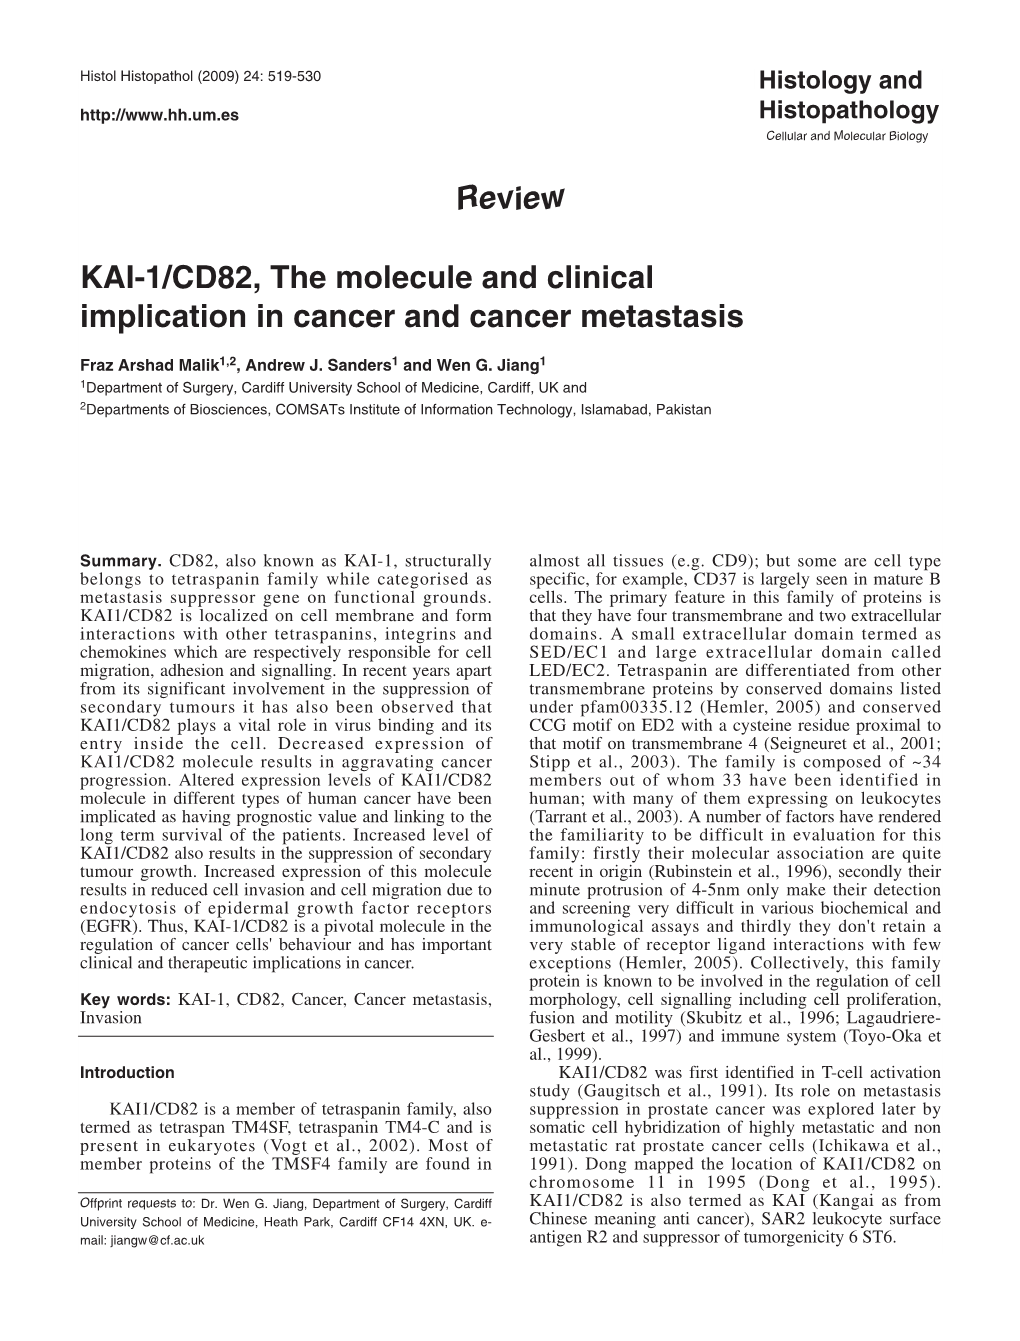 Review KAI-1/CD82, the Molecule and Clinical Implication in Cancer